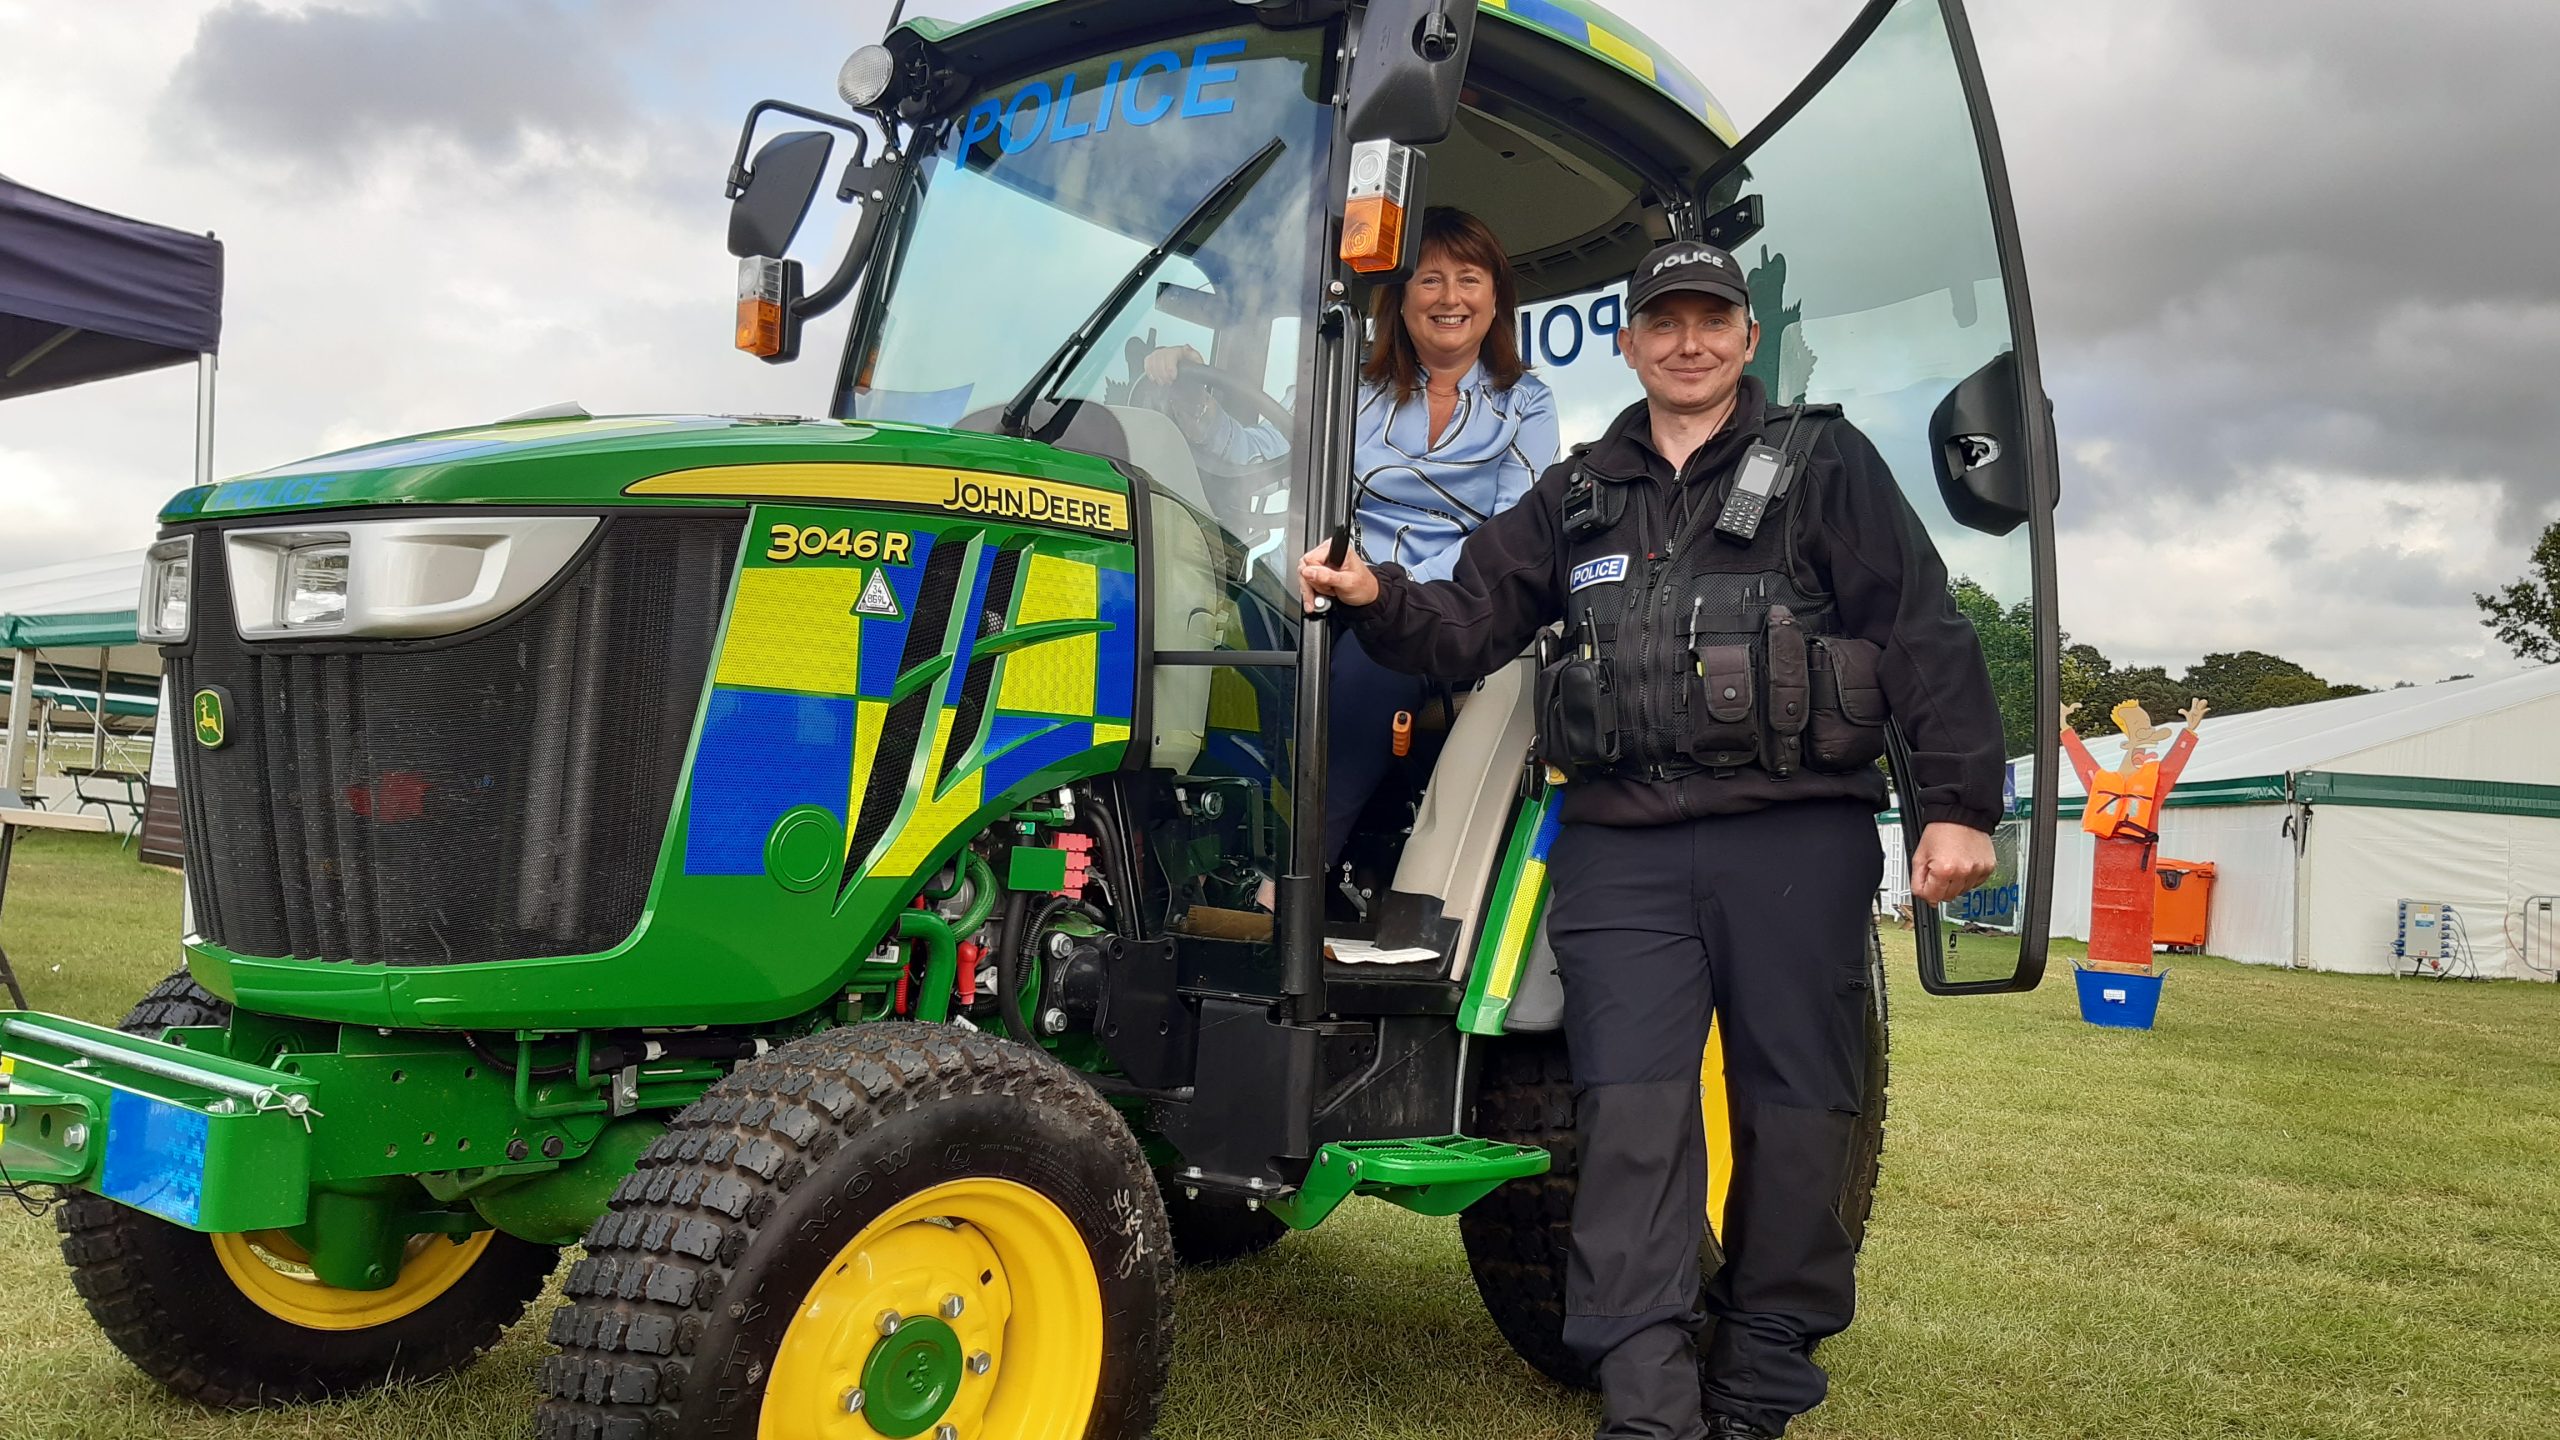 Commissioner Zoe with a North Yorkshire Police Rural Task Force Officer at the Great Yorkshire Show.